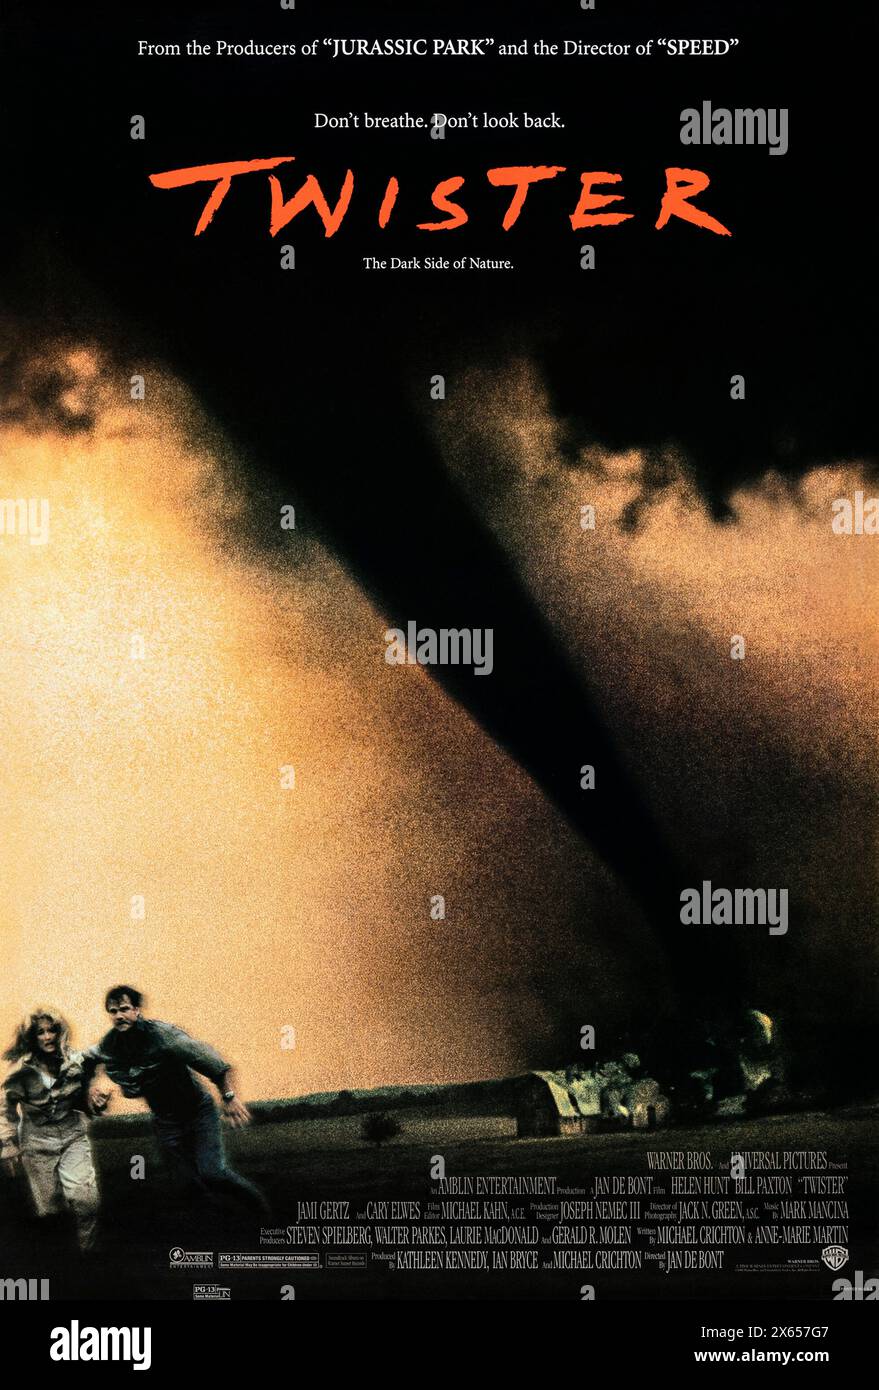 Twister (1996) directed by Jan de Bont and starring Helen Hunt, Bill Paxton and Cary Elwes. Two storm chasers on the brink of divorce must work together to create an advanced weather alert system by putting themselves in the cross-hairs of extremely violent tornadoes. Photograph of an original 1996 US one sheet poster. ***EDITORIAL USE ONLY*** Credit: BFA / Warner Bros Stock Photo